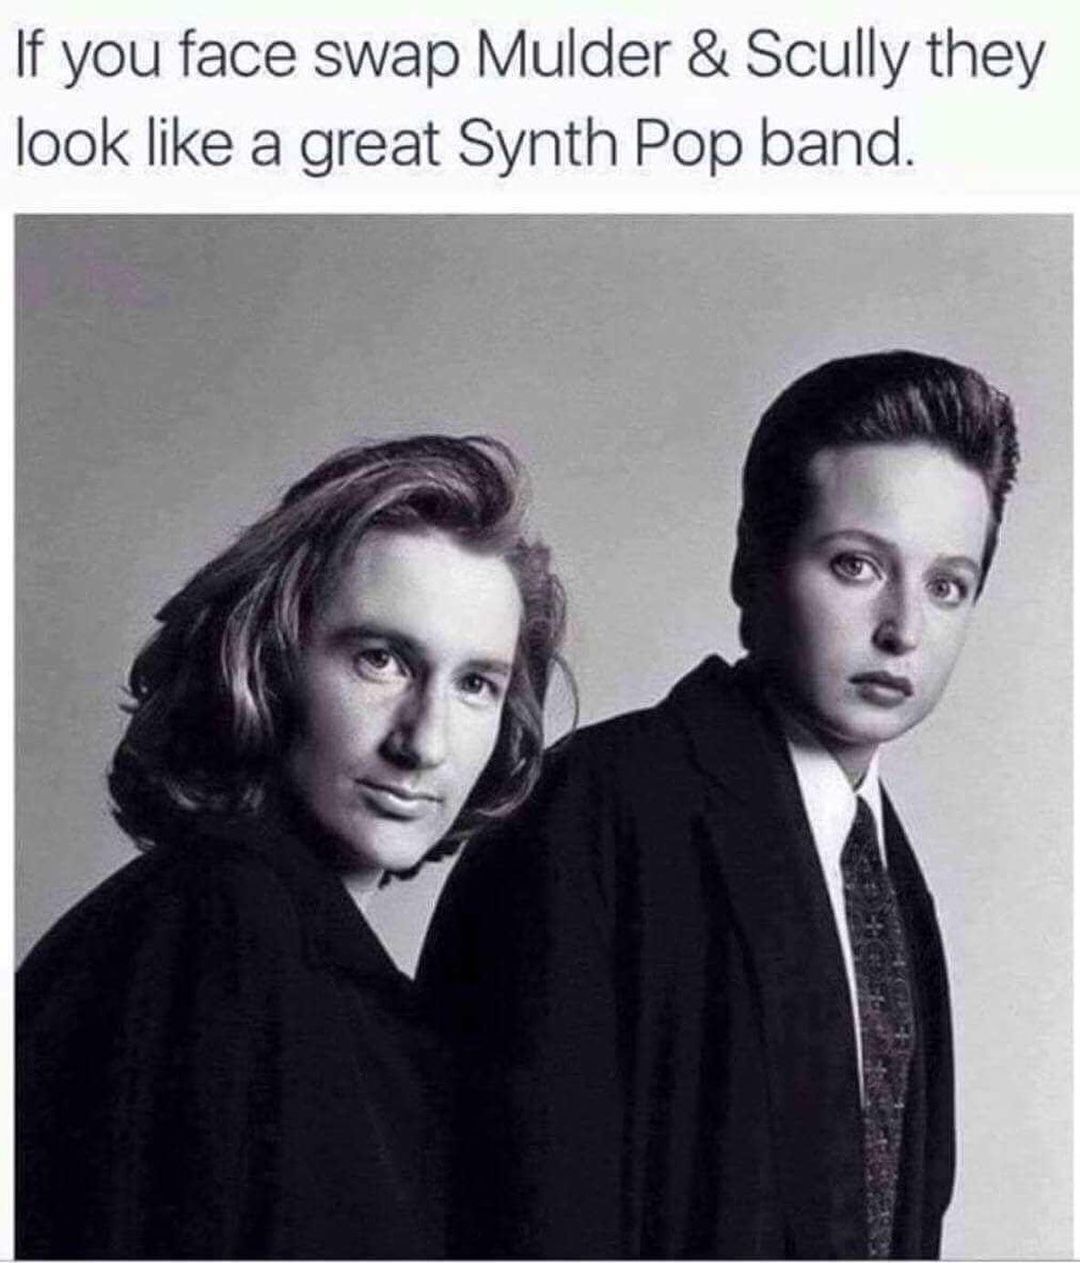 If you face swap Mulder & Scully they look like a great Synth Pop band.